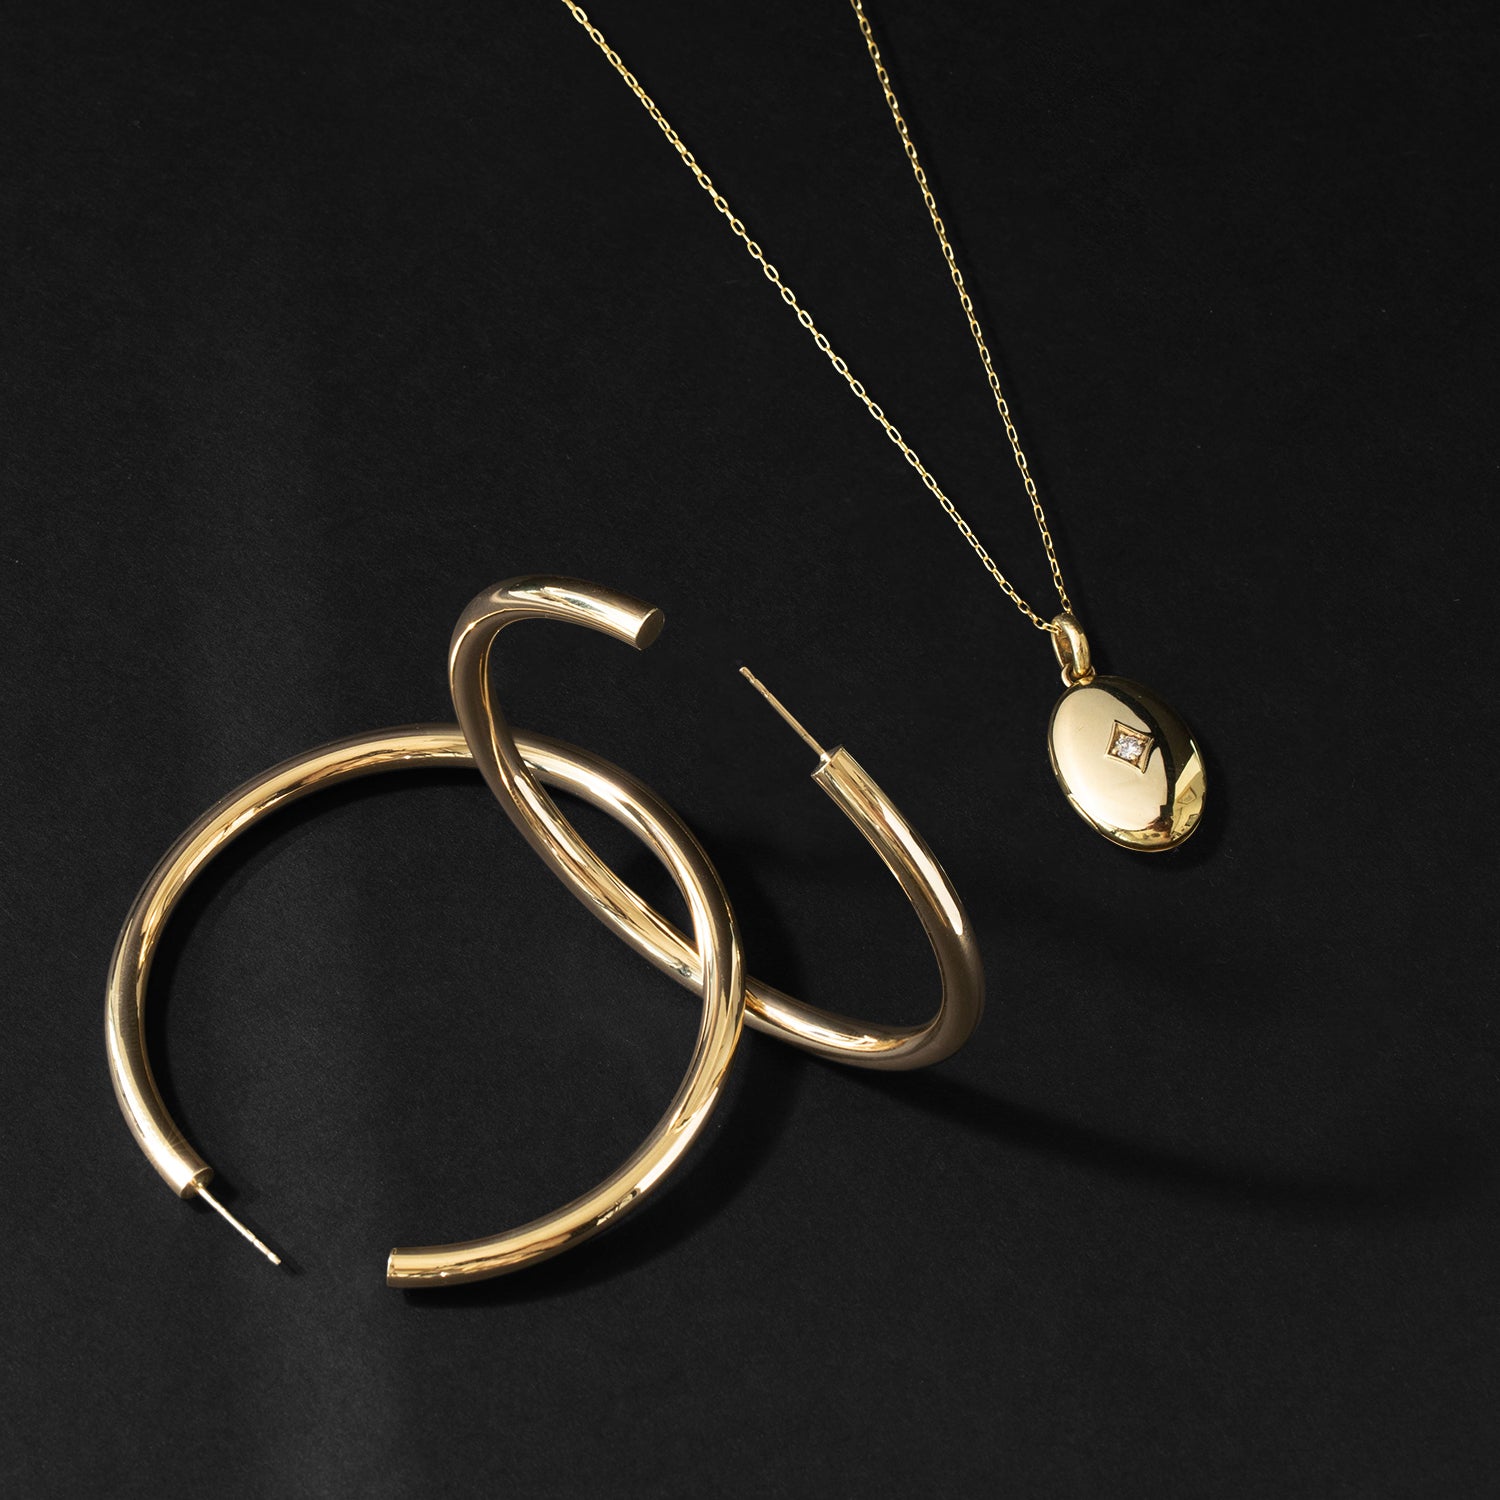 ILA SODHANI's Medium Addax Hoops in yellow gold intertwined, shown with the ILA SODHANI Tara Locket in yellow gold with an oval pendant that has a natural diamond set in an etched diamond space, on a black background.